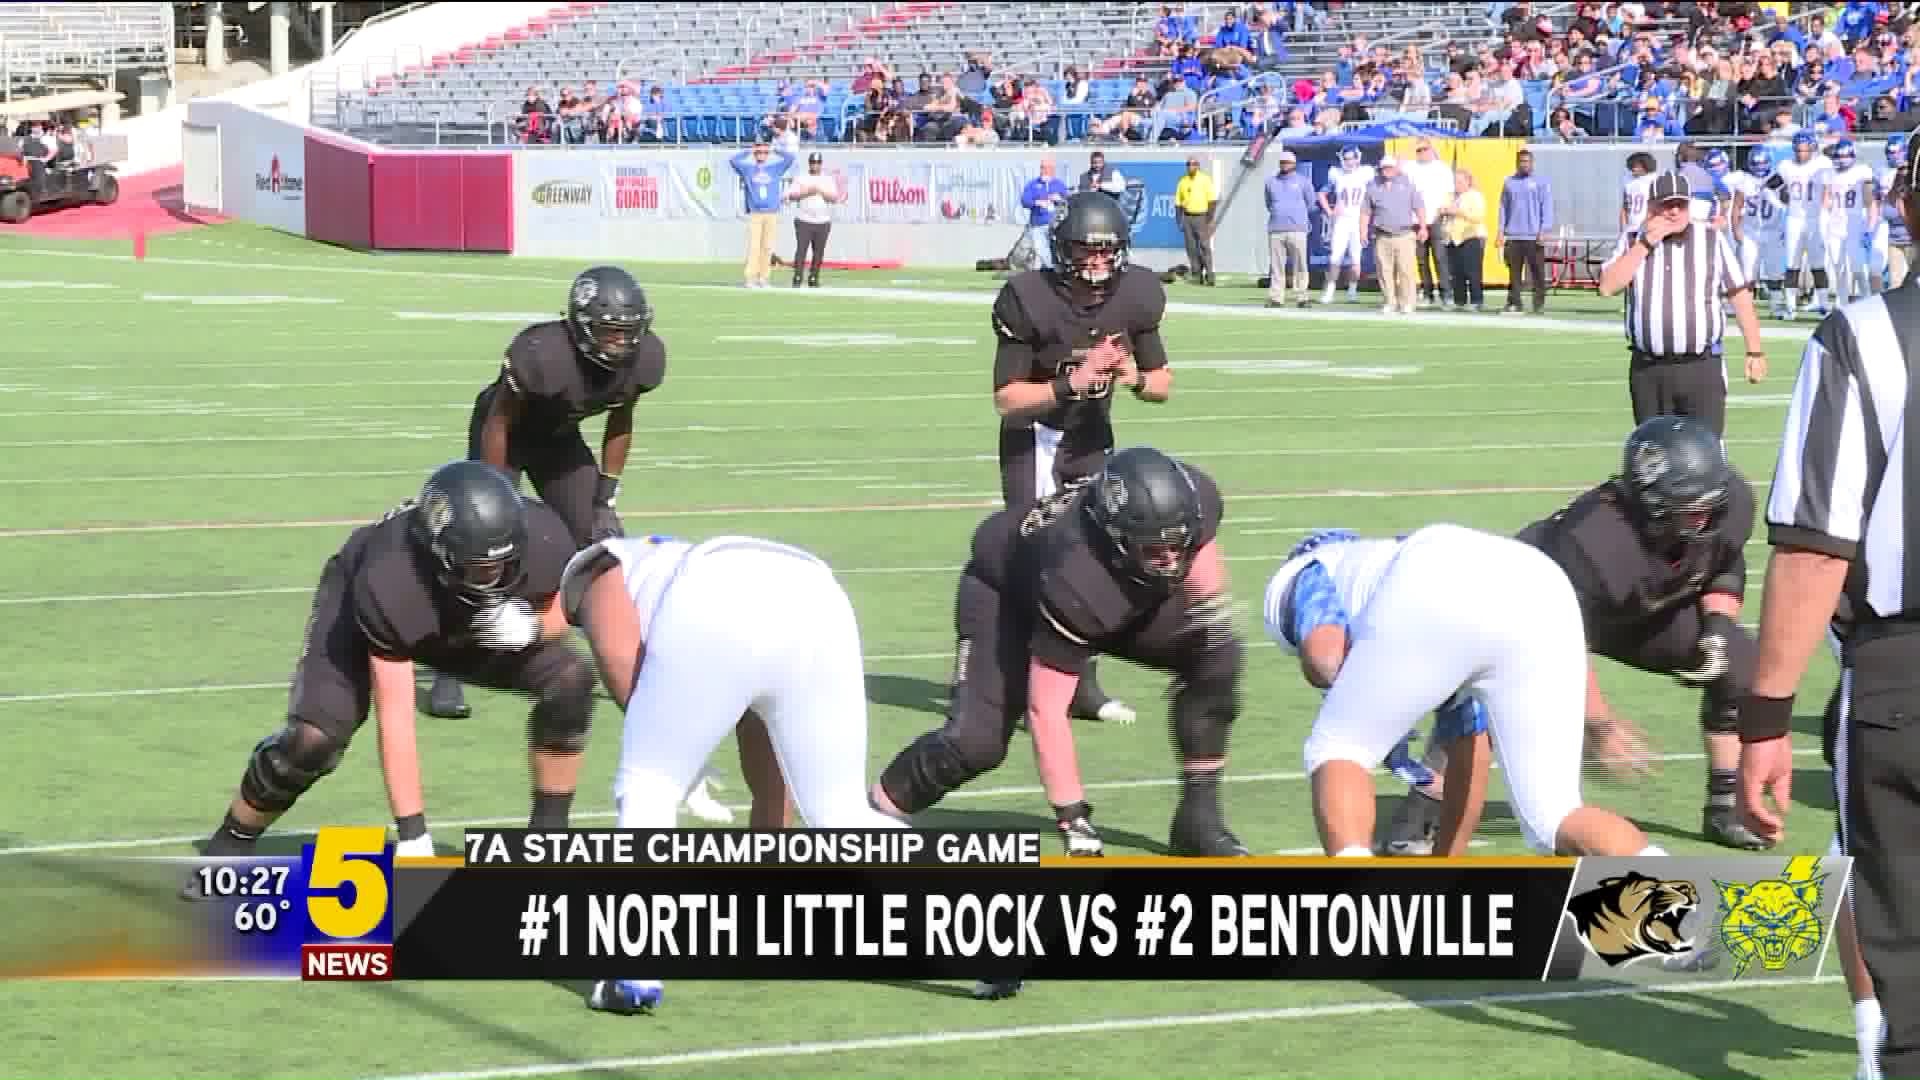 VIDEO: North Little Rock Edges Bentonville For 7A State Title